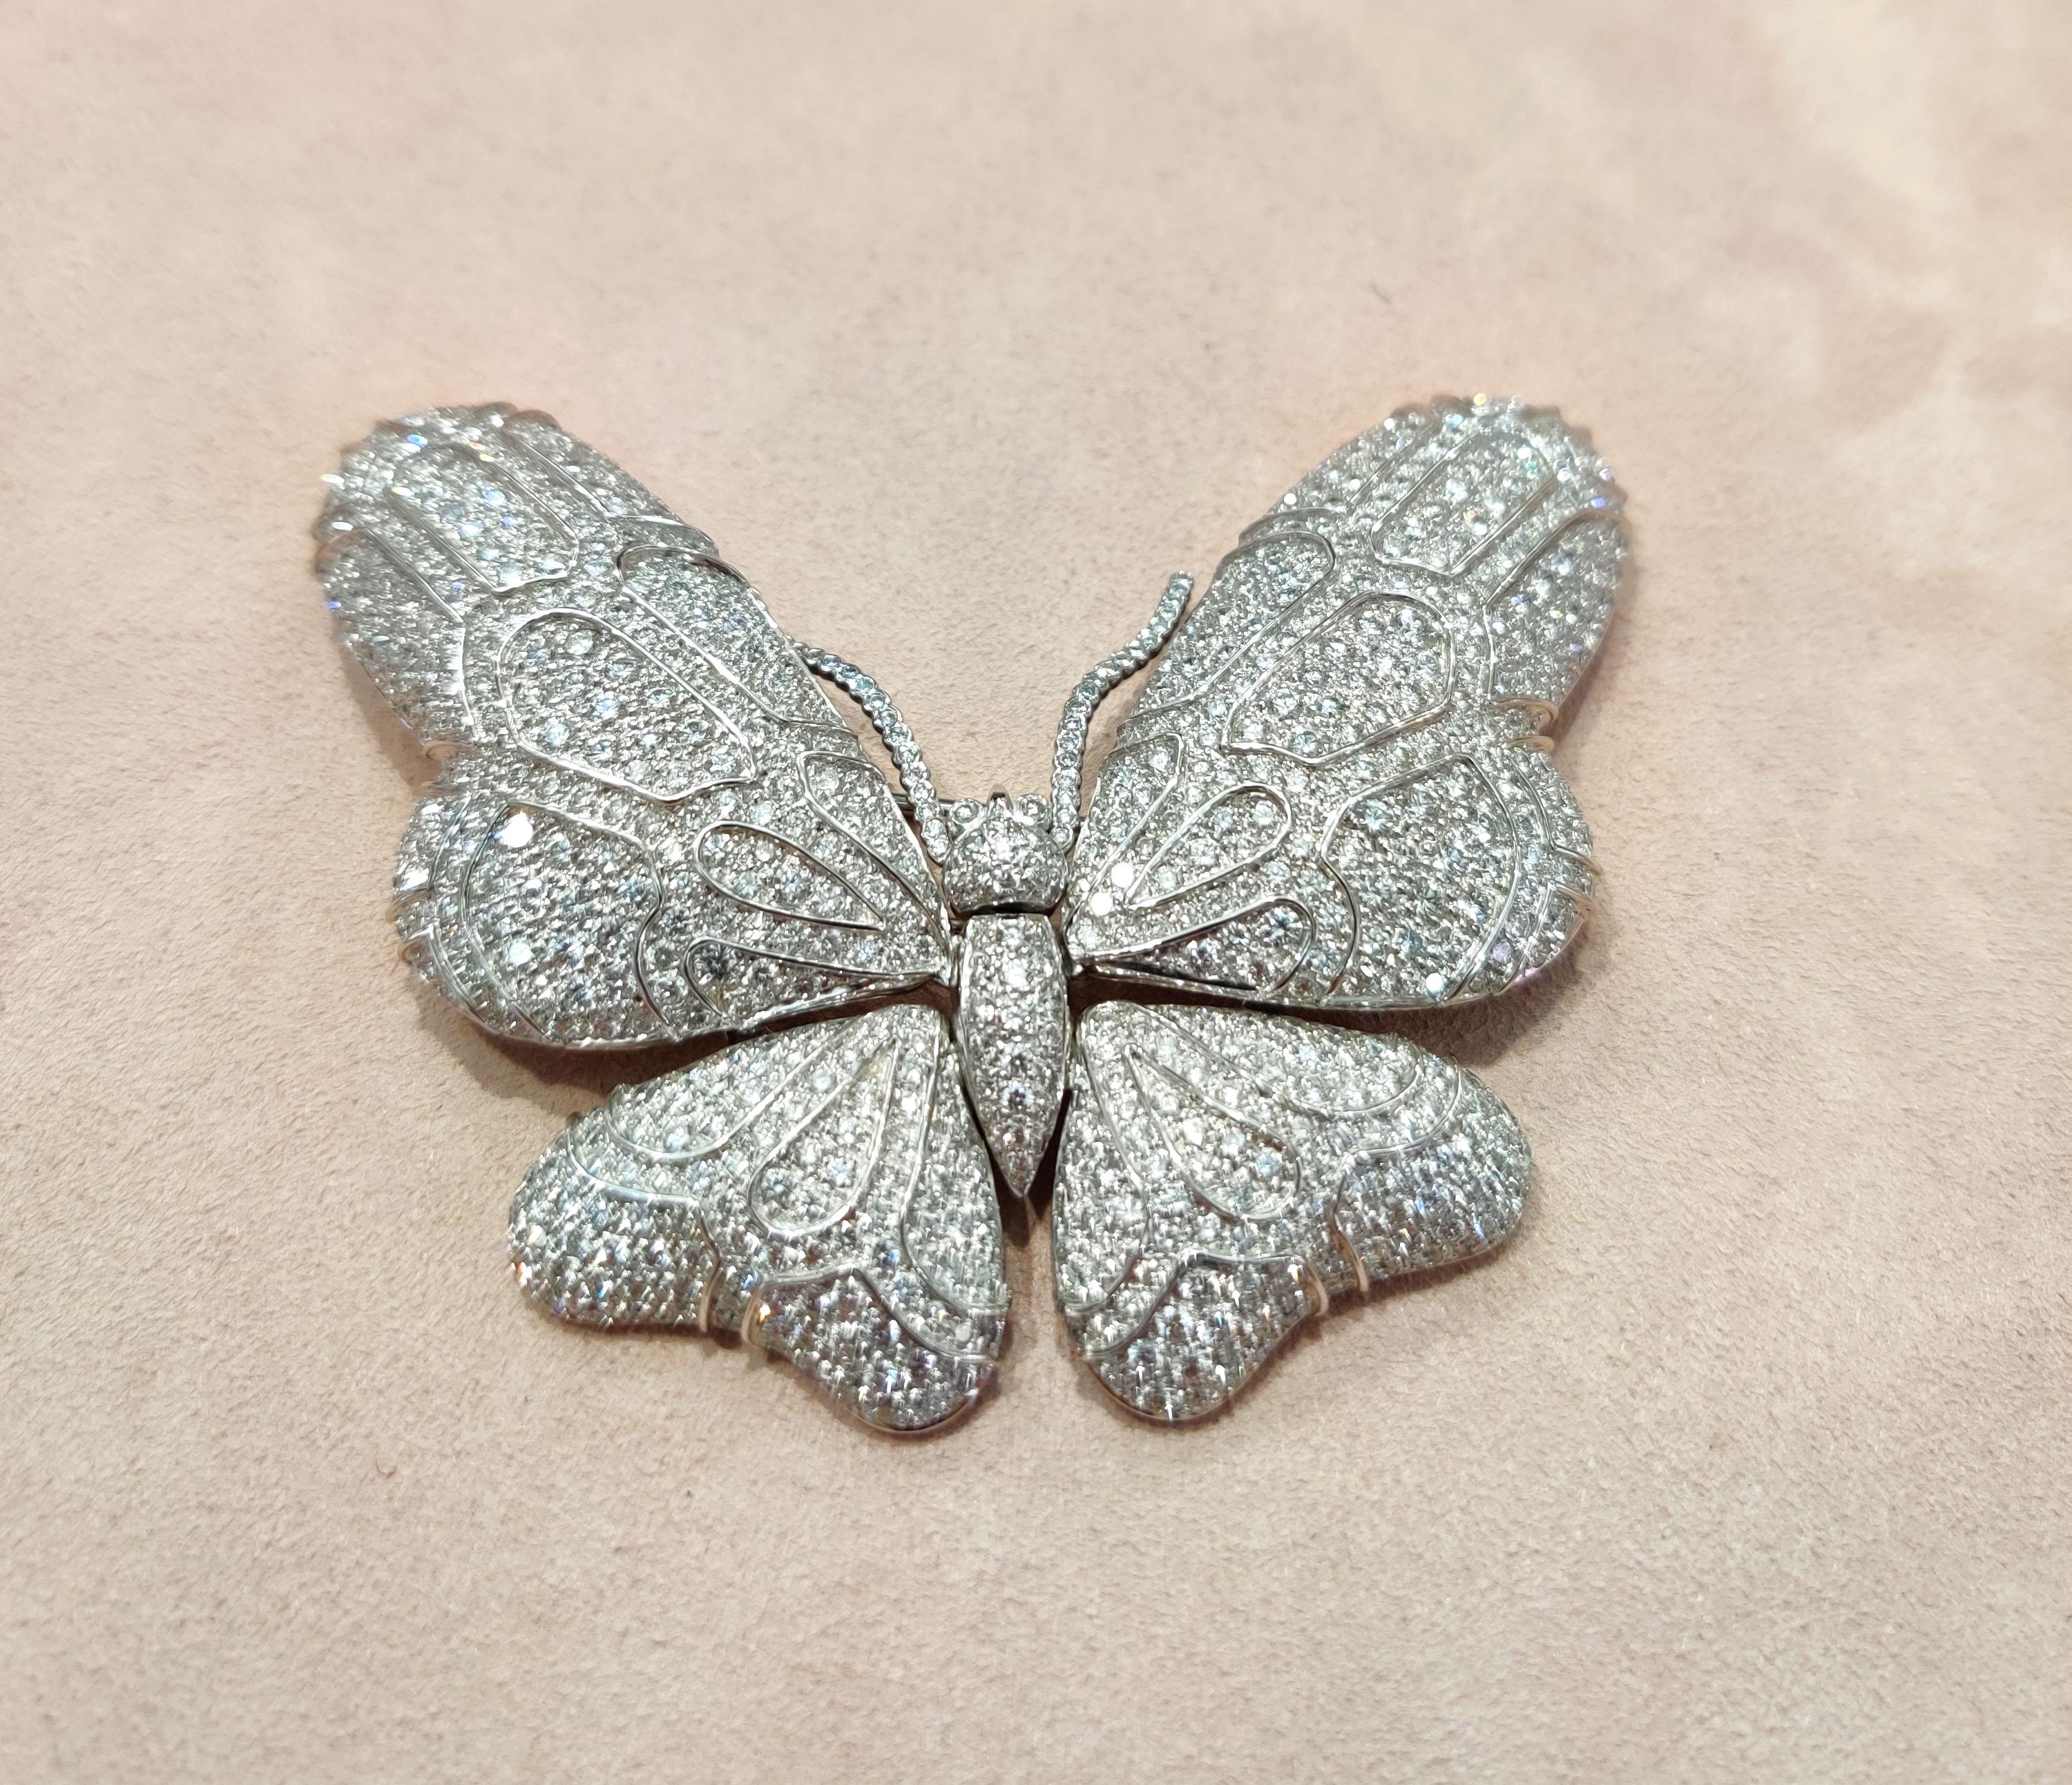 Women's or Men's Magnificent 12.15 Carat Diamond Butterfly Brooch By Chatila For Sale